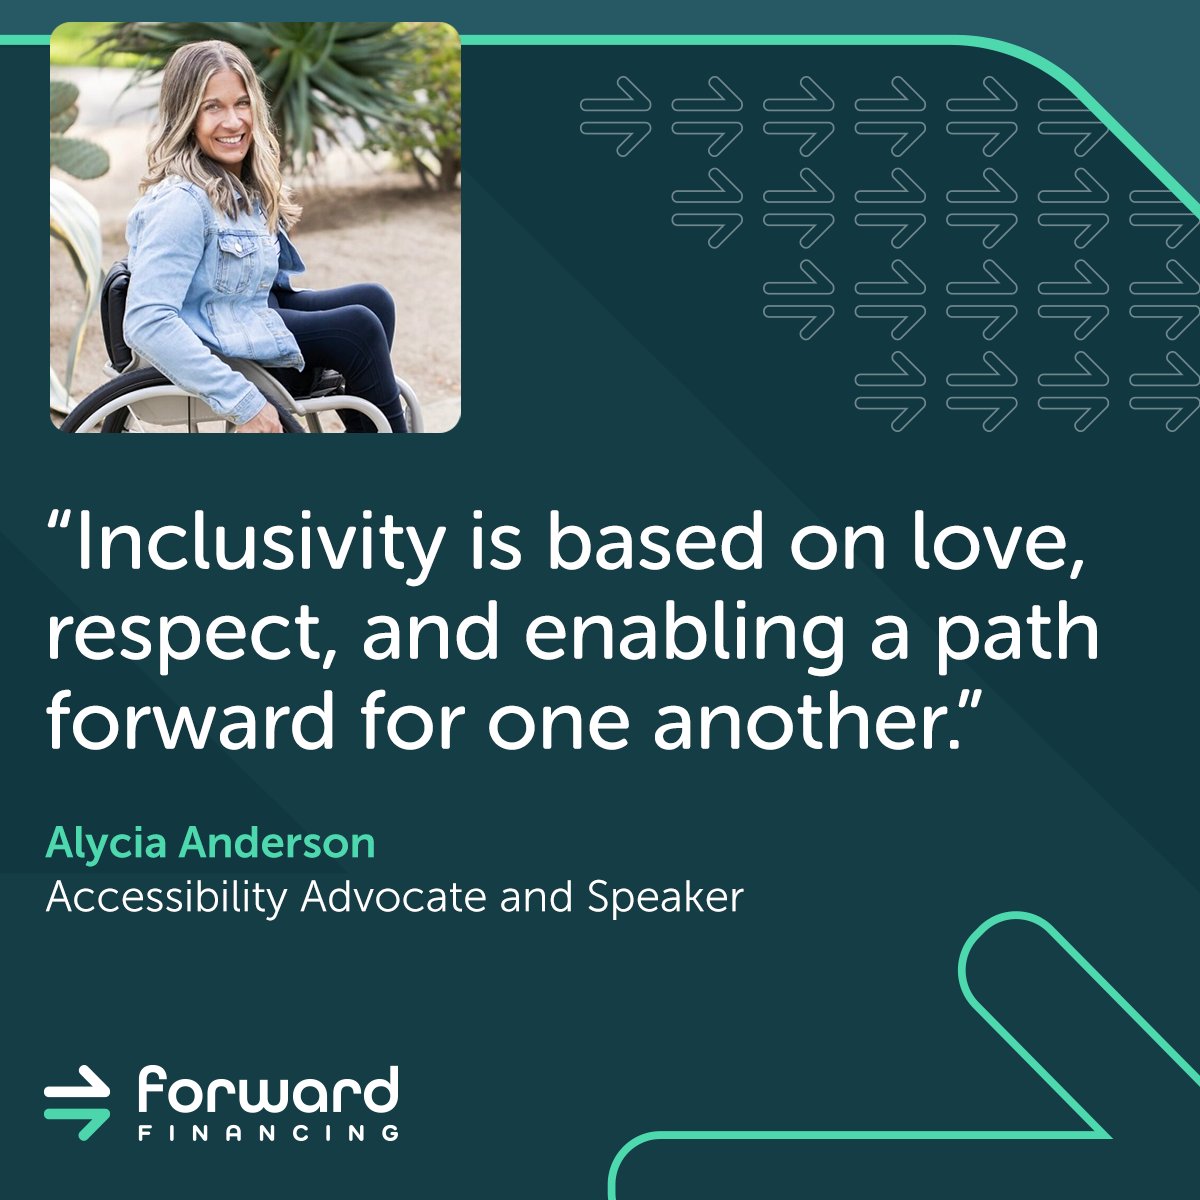 In recognition of Disability Pride Month, our team joined a session with @alyciaspeaking focused on Disabling Ableism. Alycia shared her story and lived experiences, and we learned the power accessibility can have on inclusion. Thanks, Alycia!

#lifeatforward #disablingableism